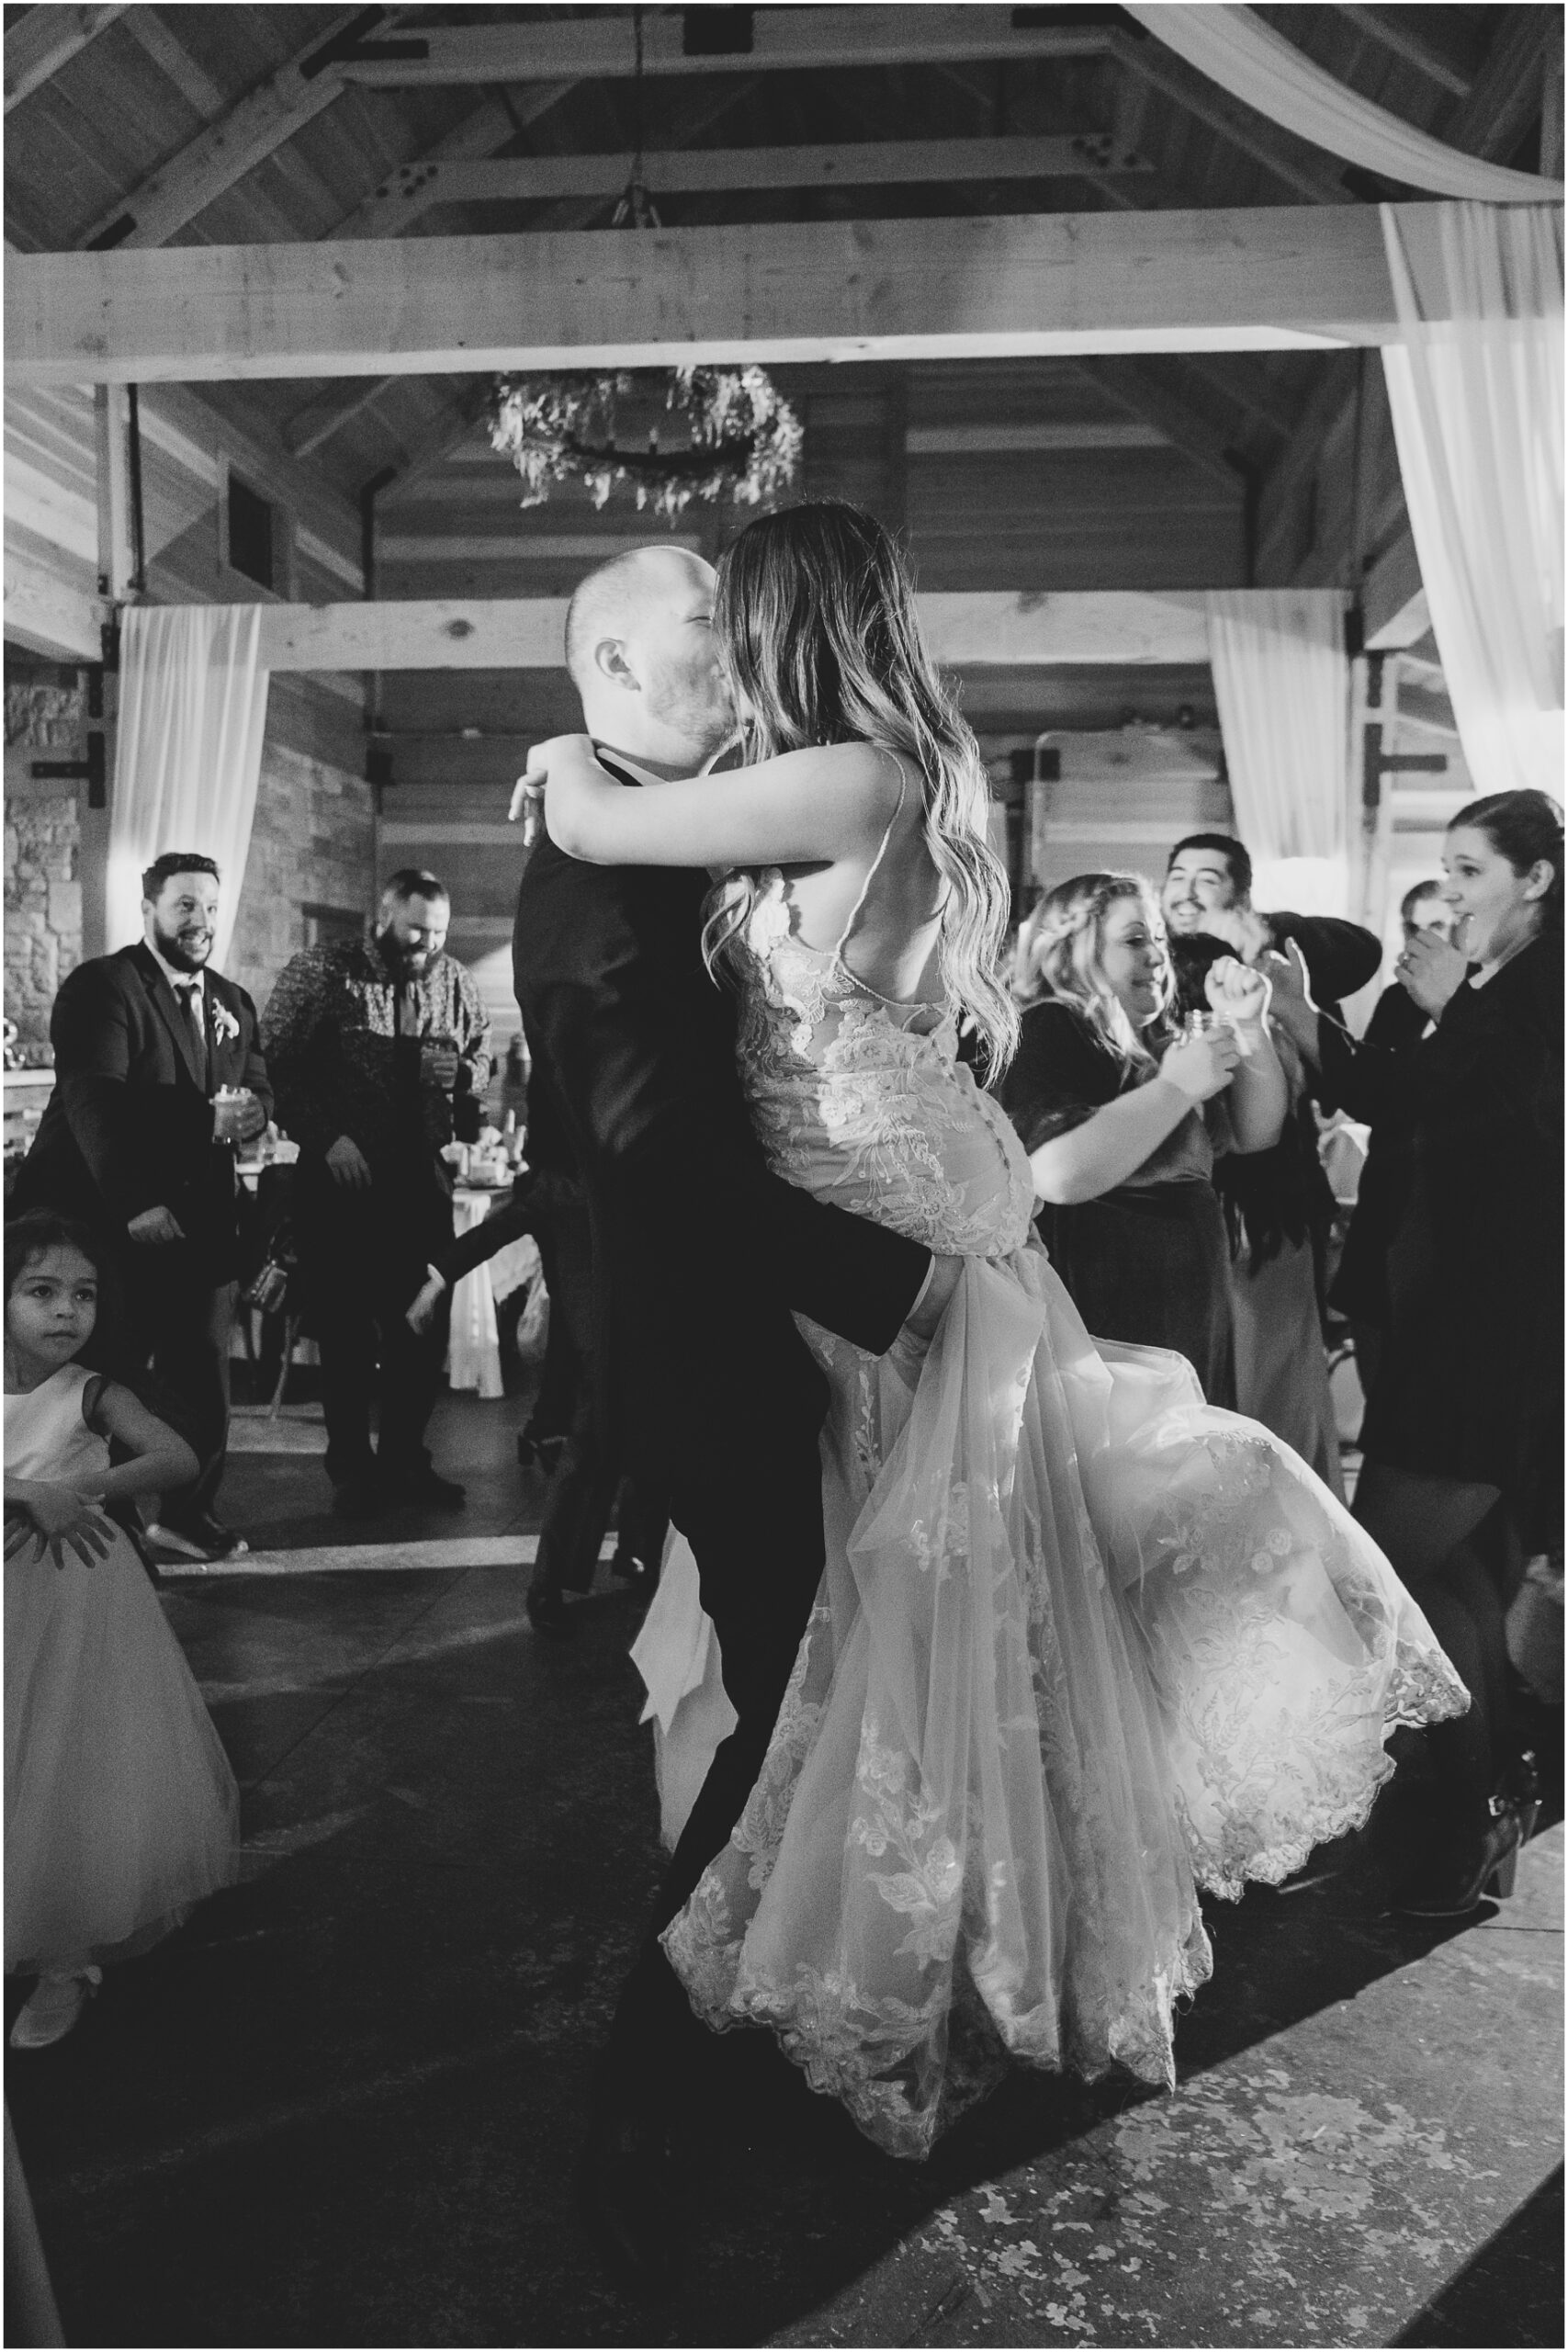 A groom lifts the bride during a dance at Serendipity Garden Weddings